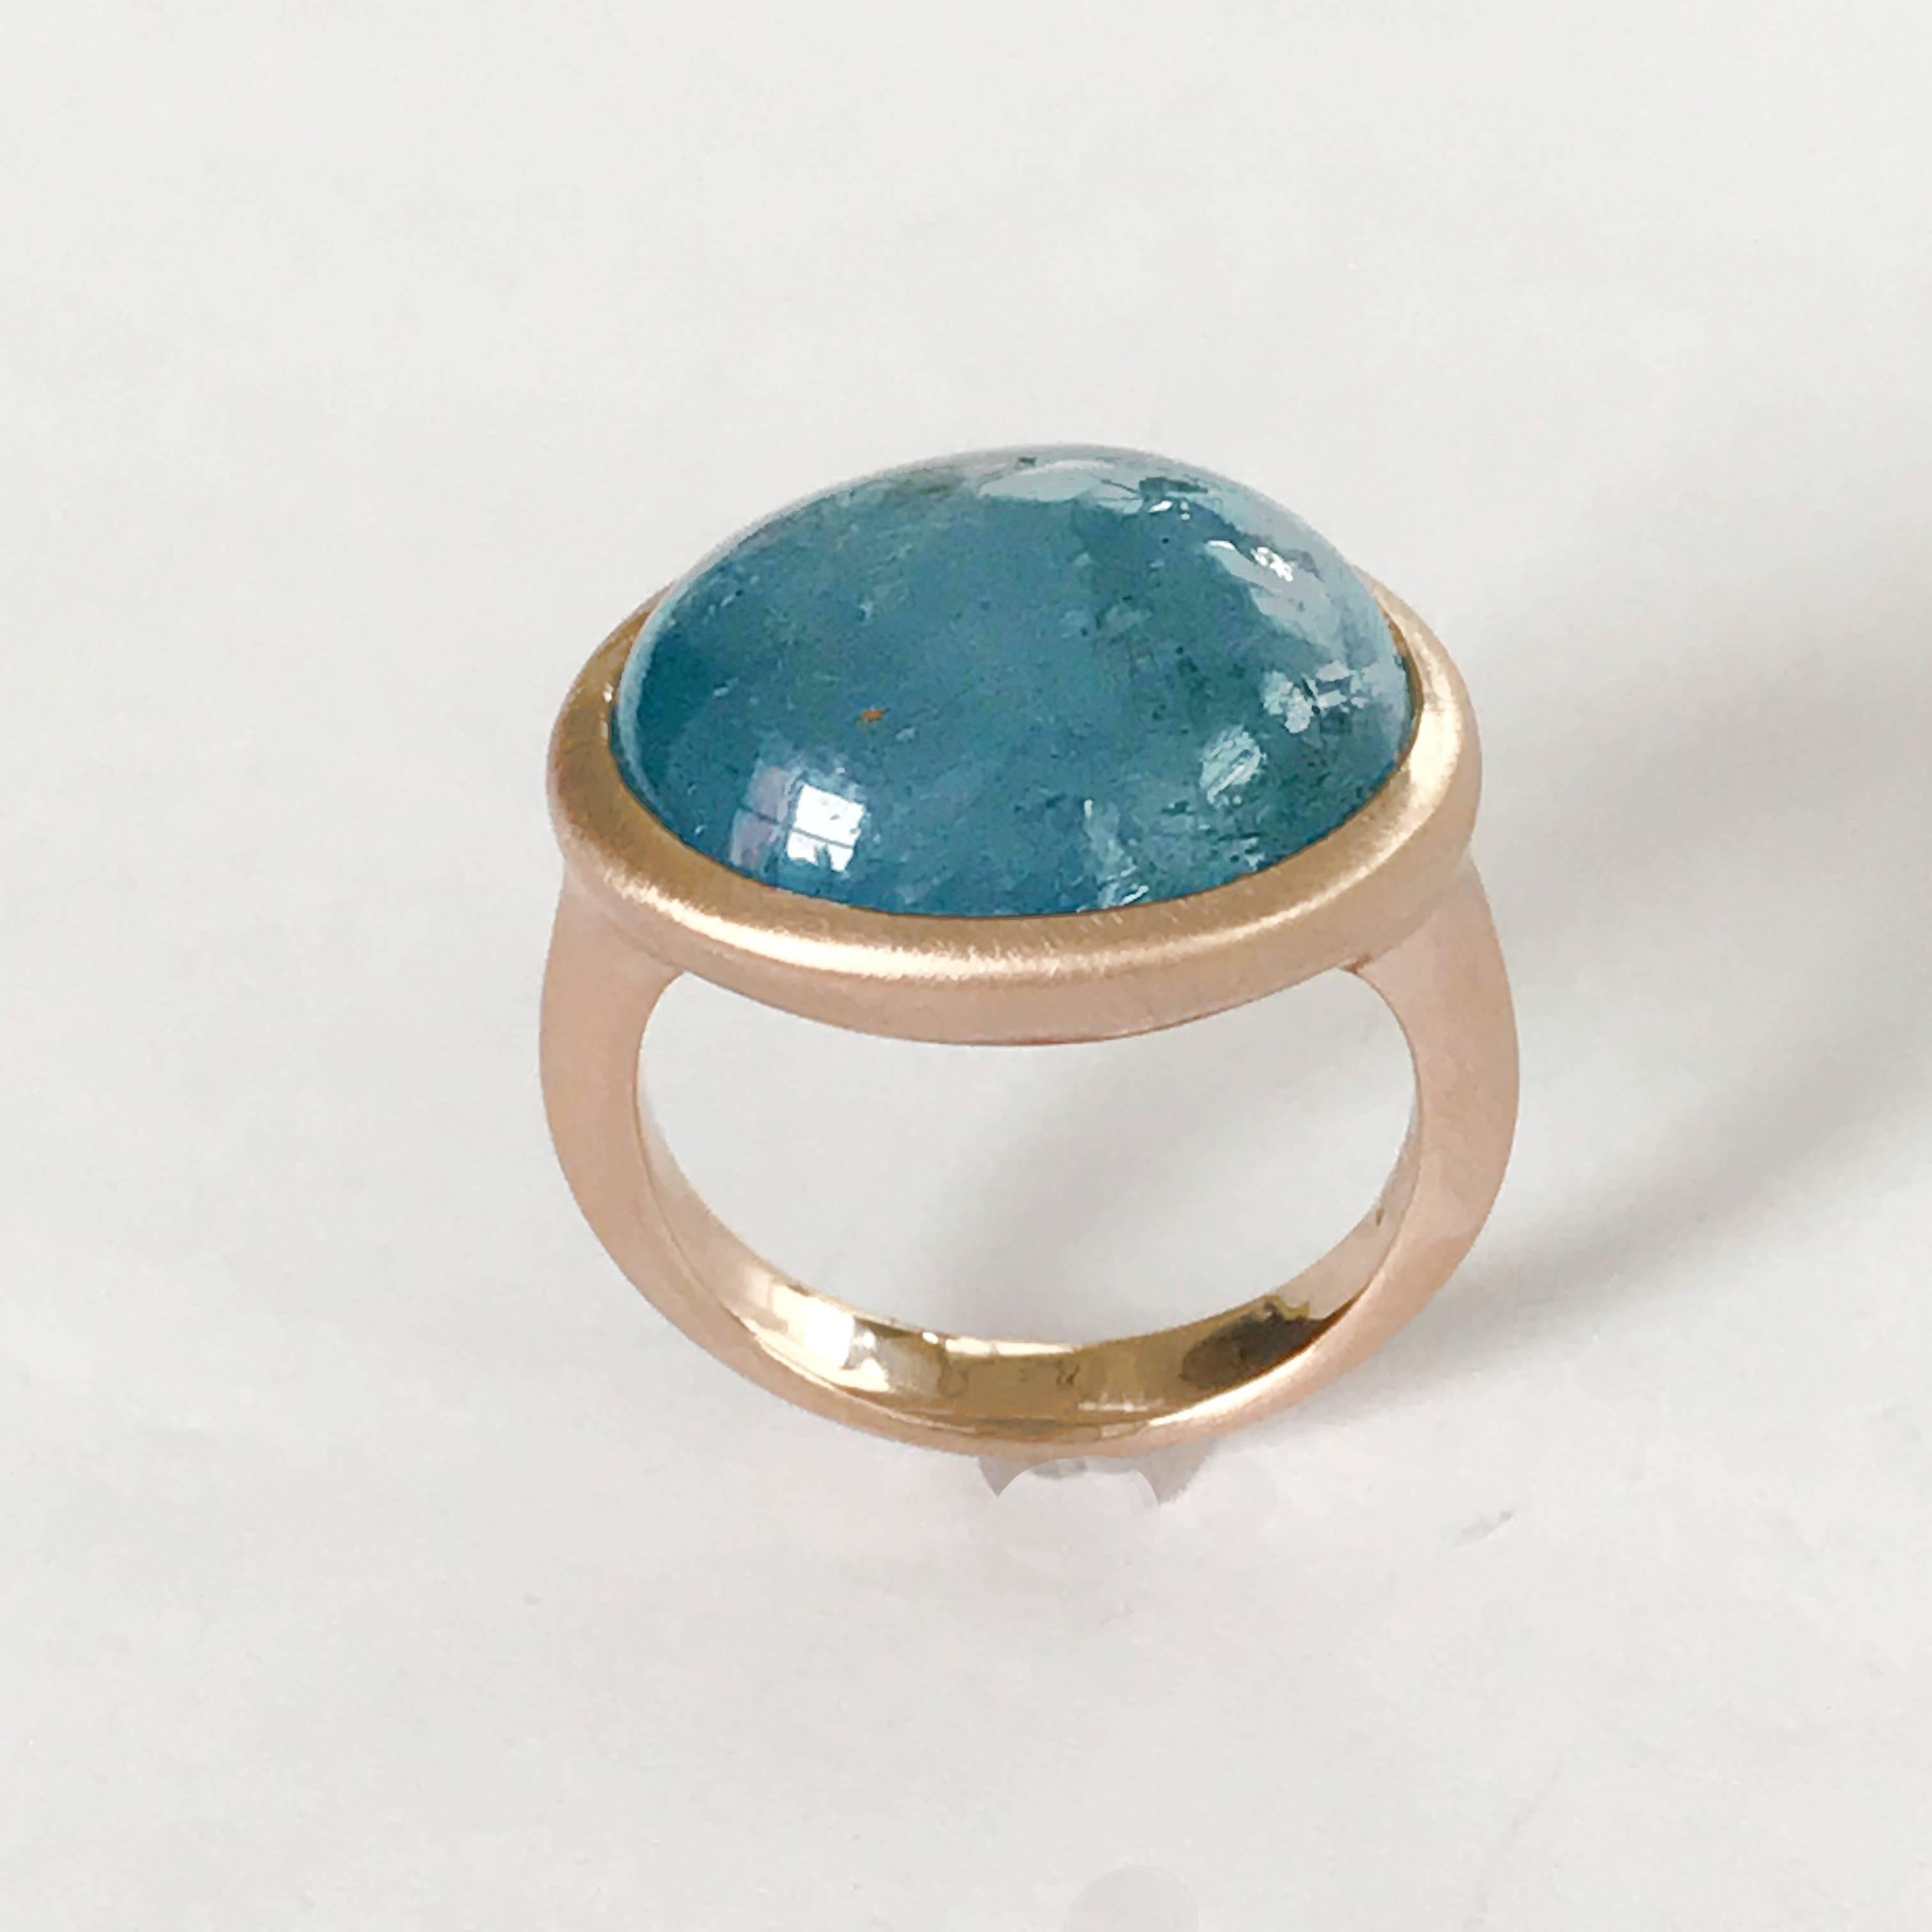 Dalben design One of a Kind 18k rose gold matte finishing ring with a  14,7 carat bezel-set cabochon cut Aquamarine. 
Ring size 7 - EU 55 re-sizable to most finger sizes.  
Bezel stone dimensions :  
width 20 mm  
height 16,60 mm  
The ring has been